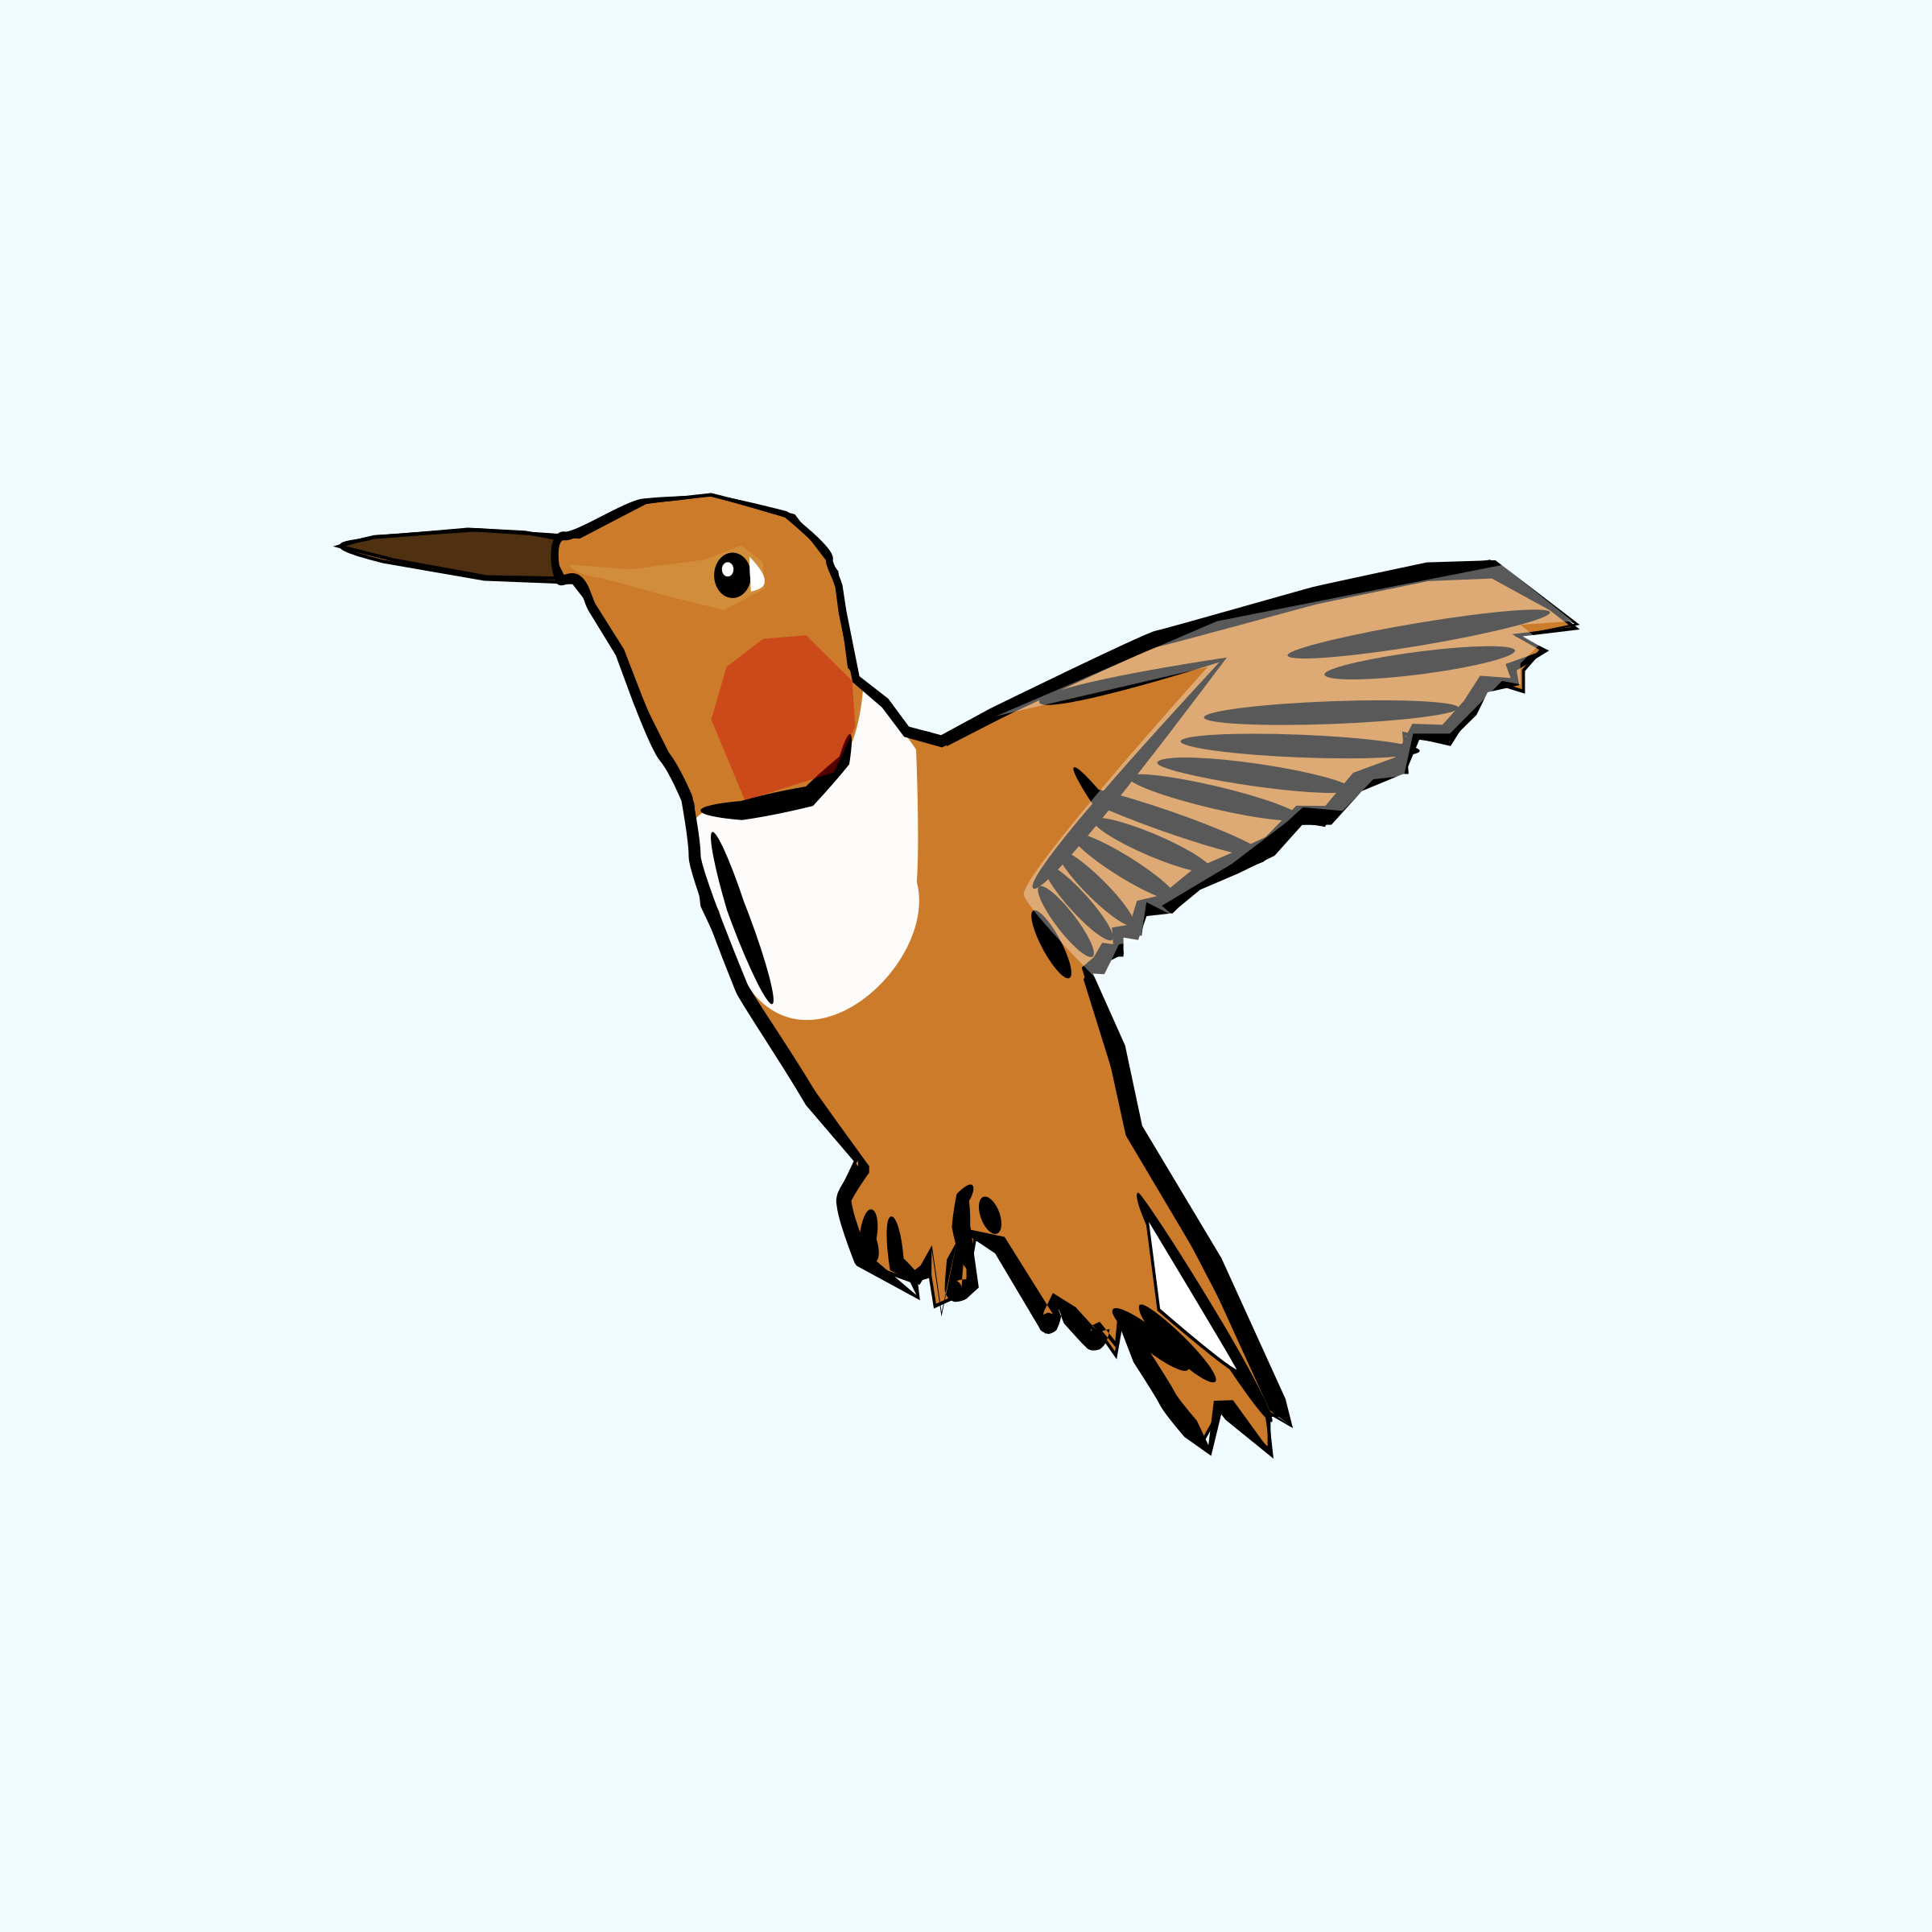 Brown and white hummingbird Vector Clipart image Free